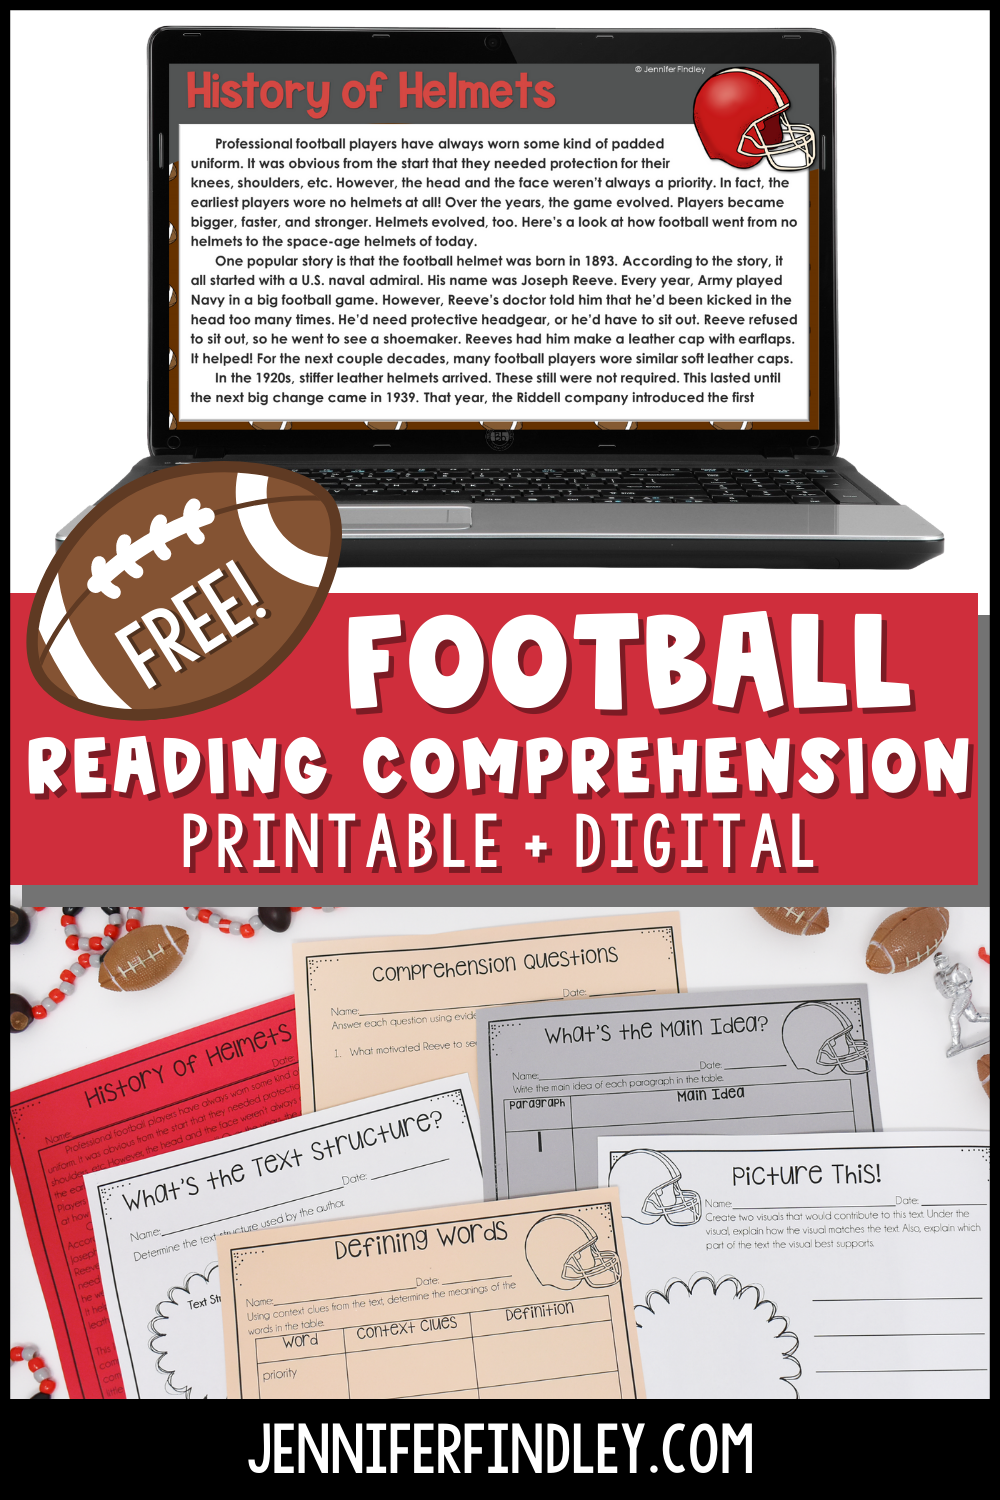 Download this football reading comprehension freebie now!